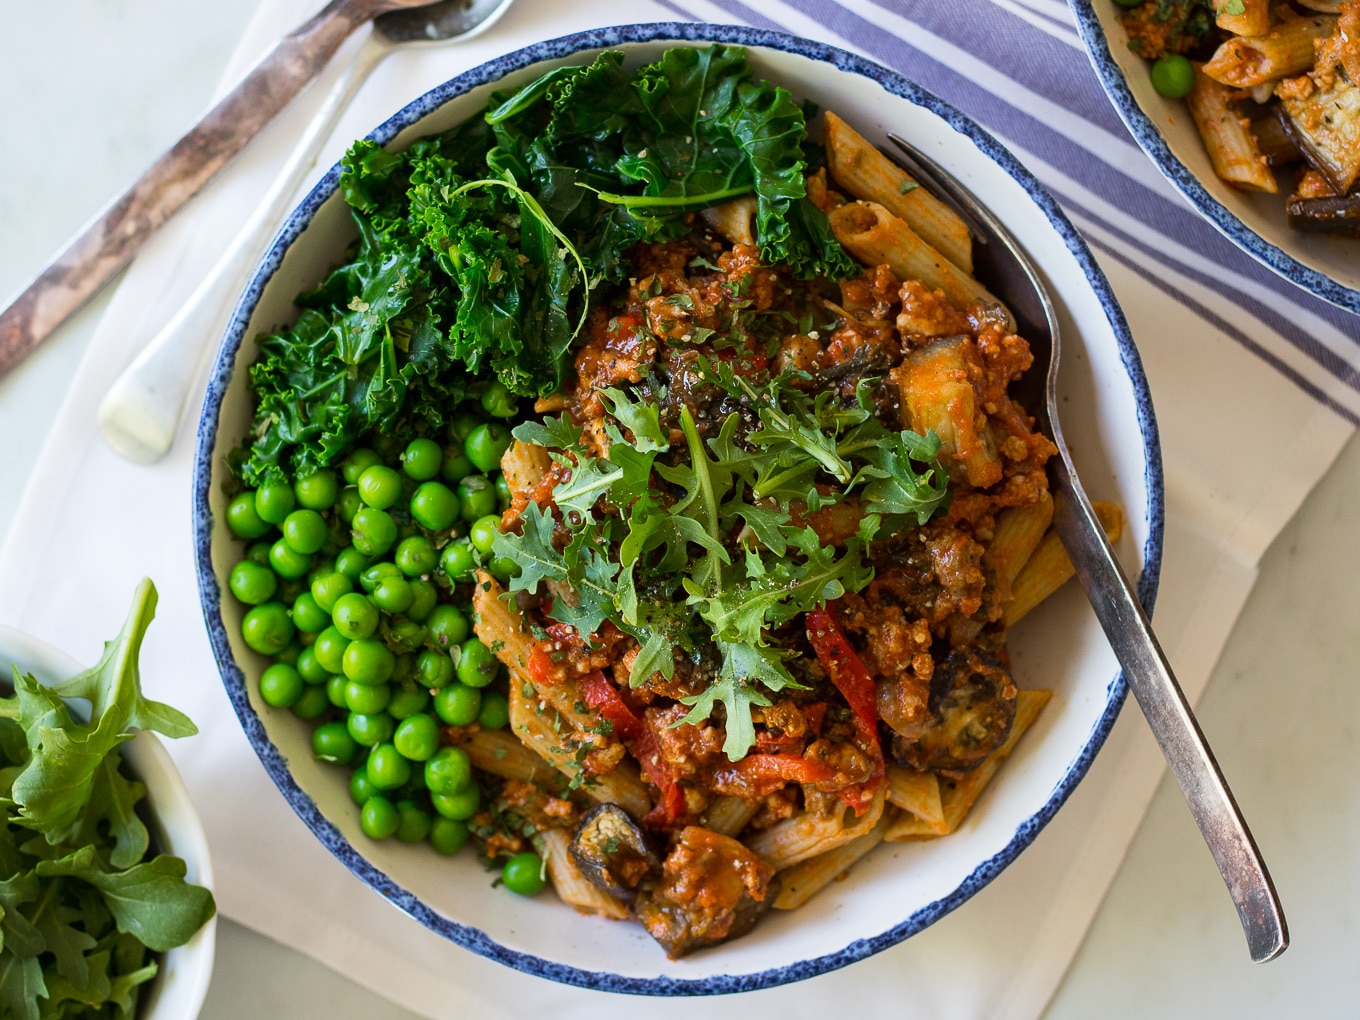 Roast Eggplant and Kale Bolognese - a healthy bolognese sauce made gluten free and dairy free. Served here over gluten free pasta, you could also go paleo and use vegetable noodles like zoodles.